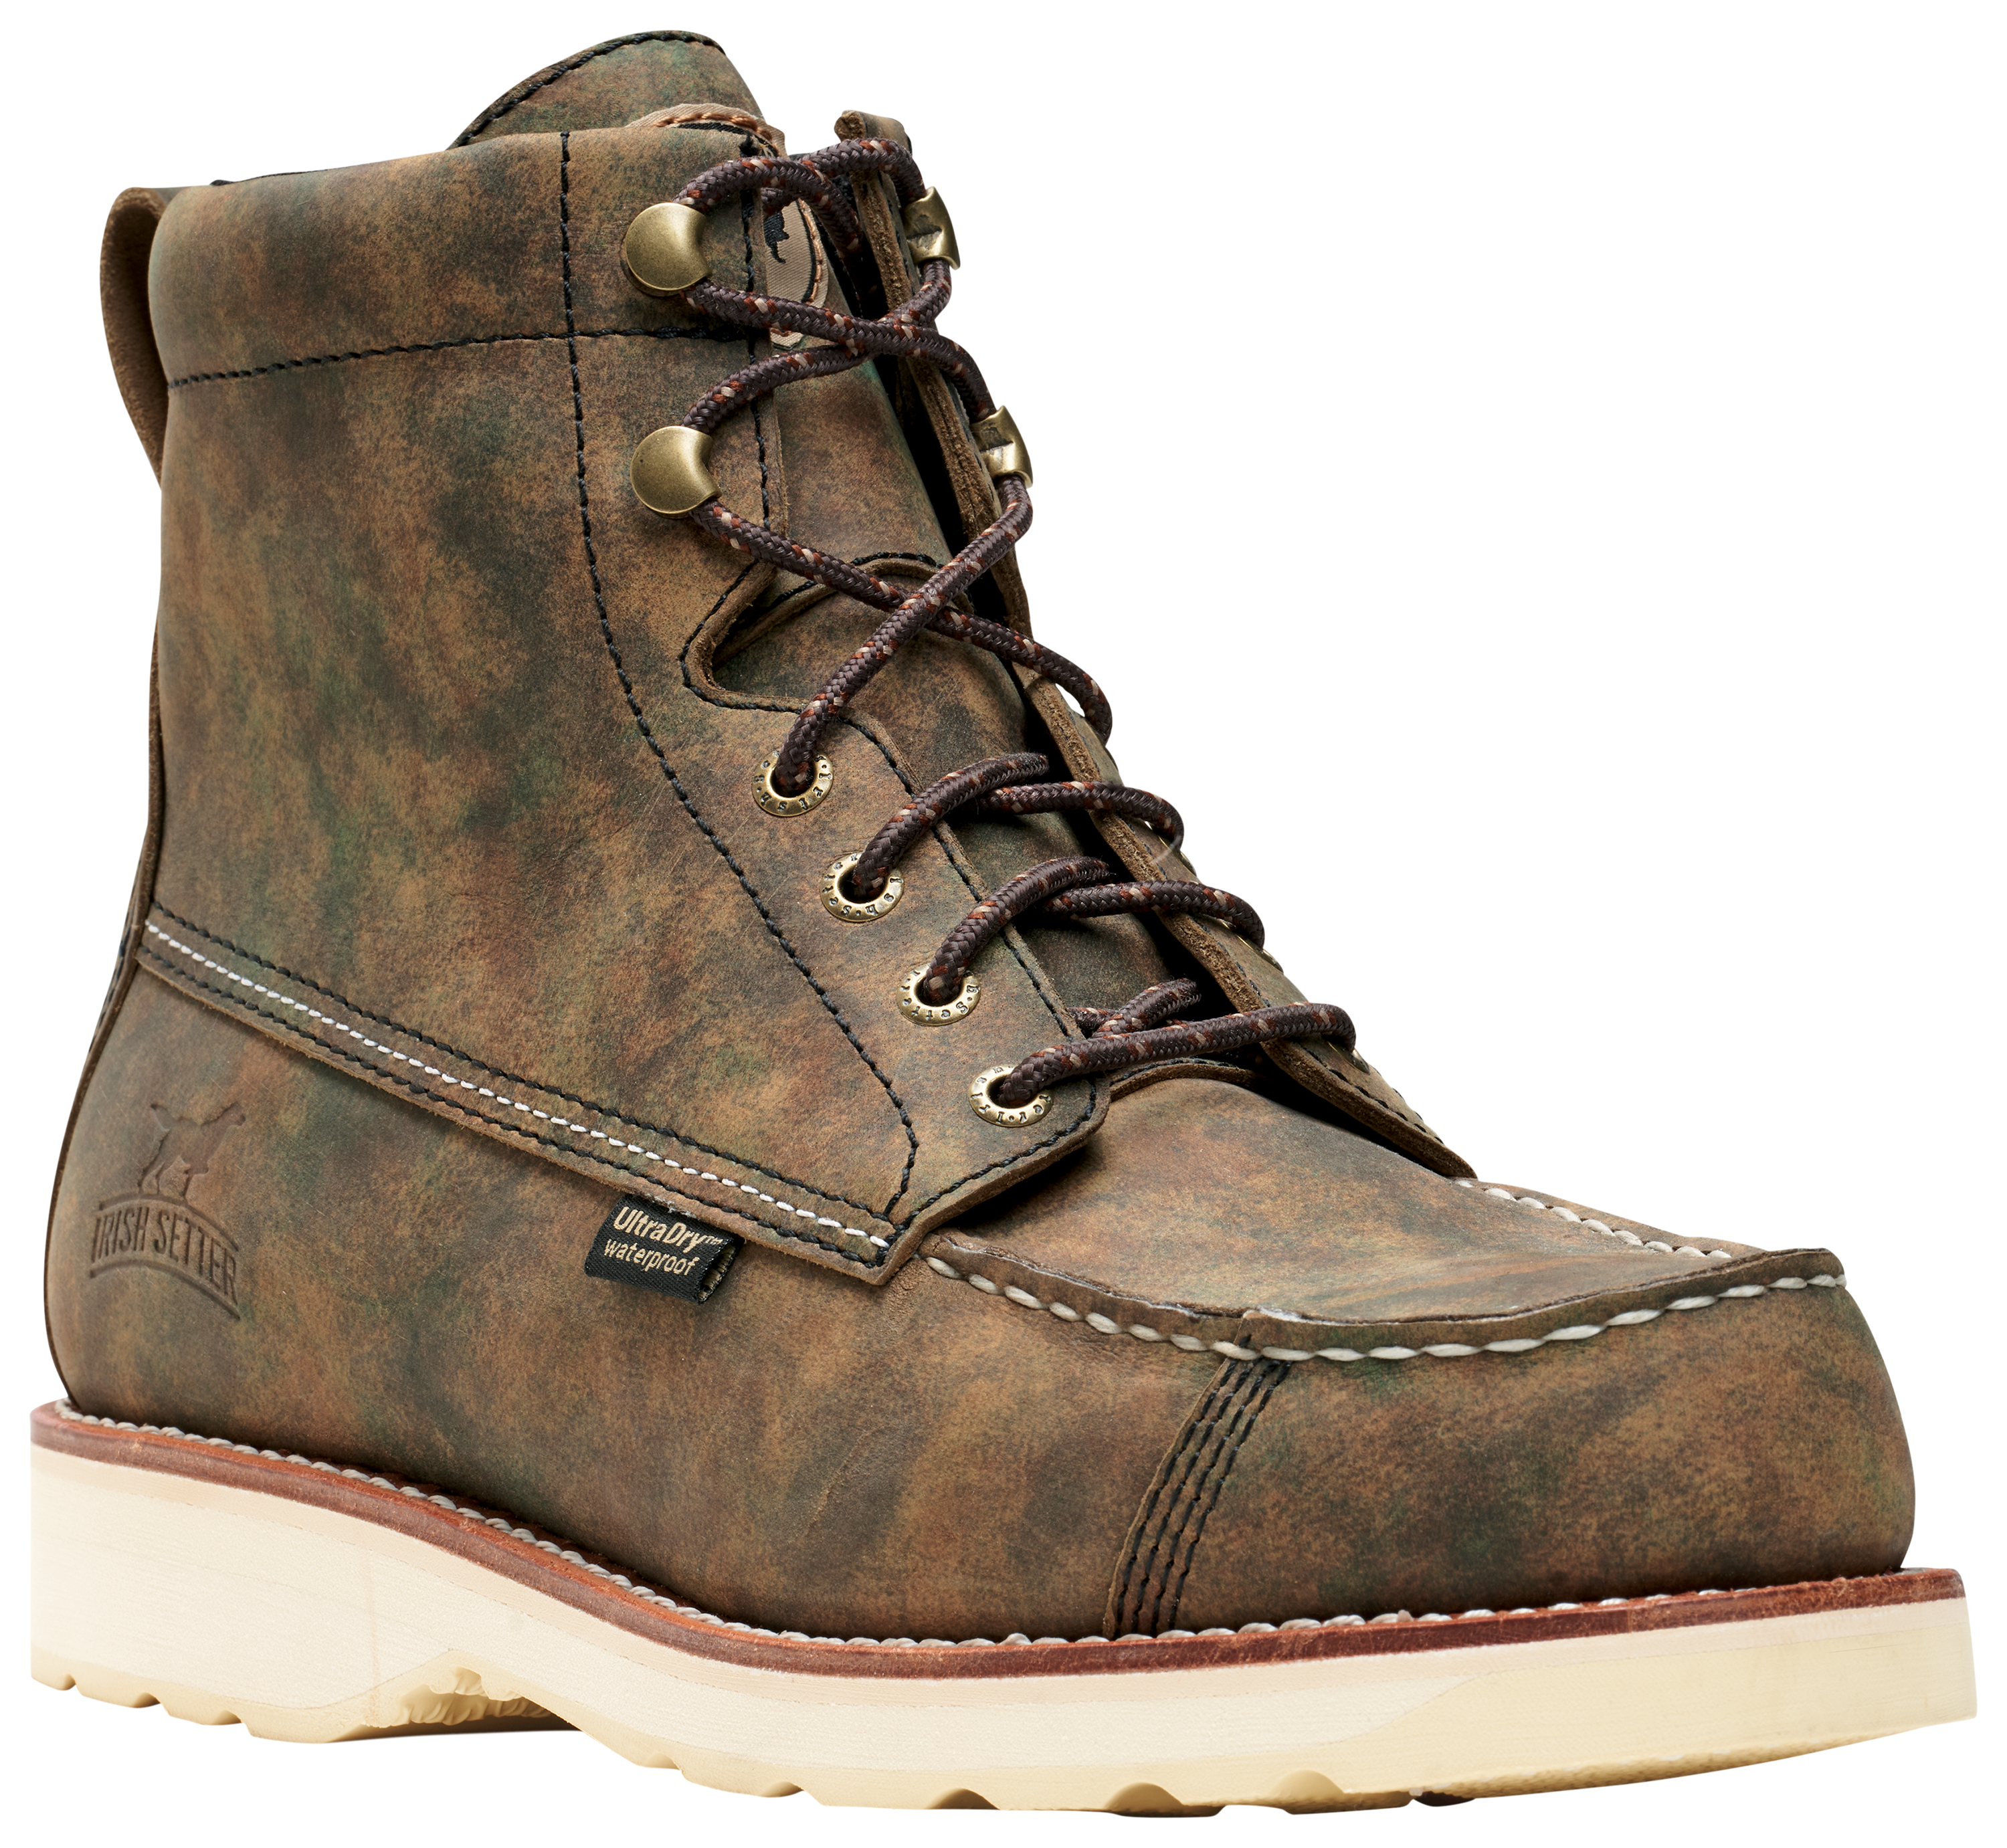 Irish Setter Wingshooter 7 Waterproof Hunting Boots for Men - Earth Camo - 9W